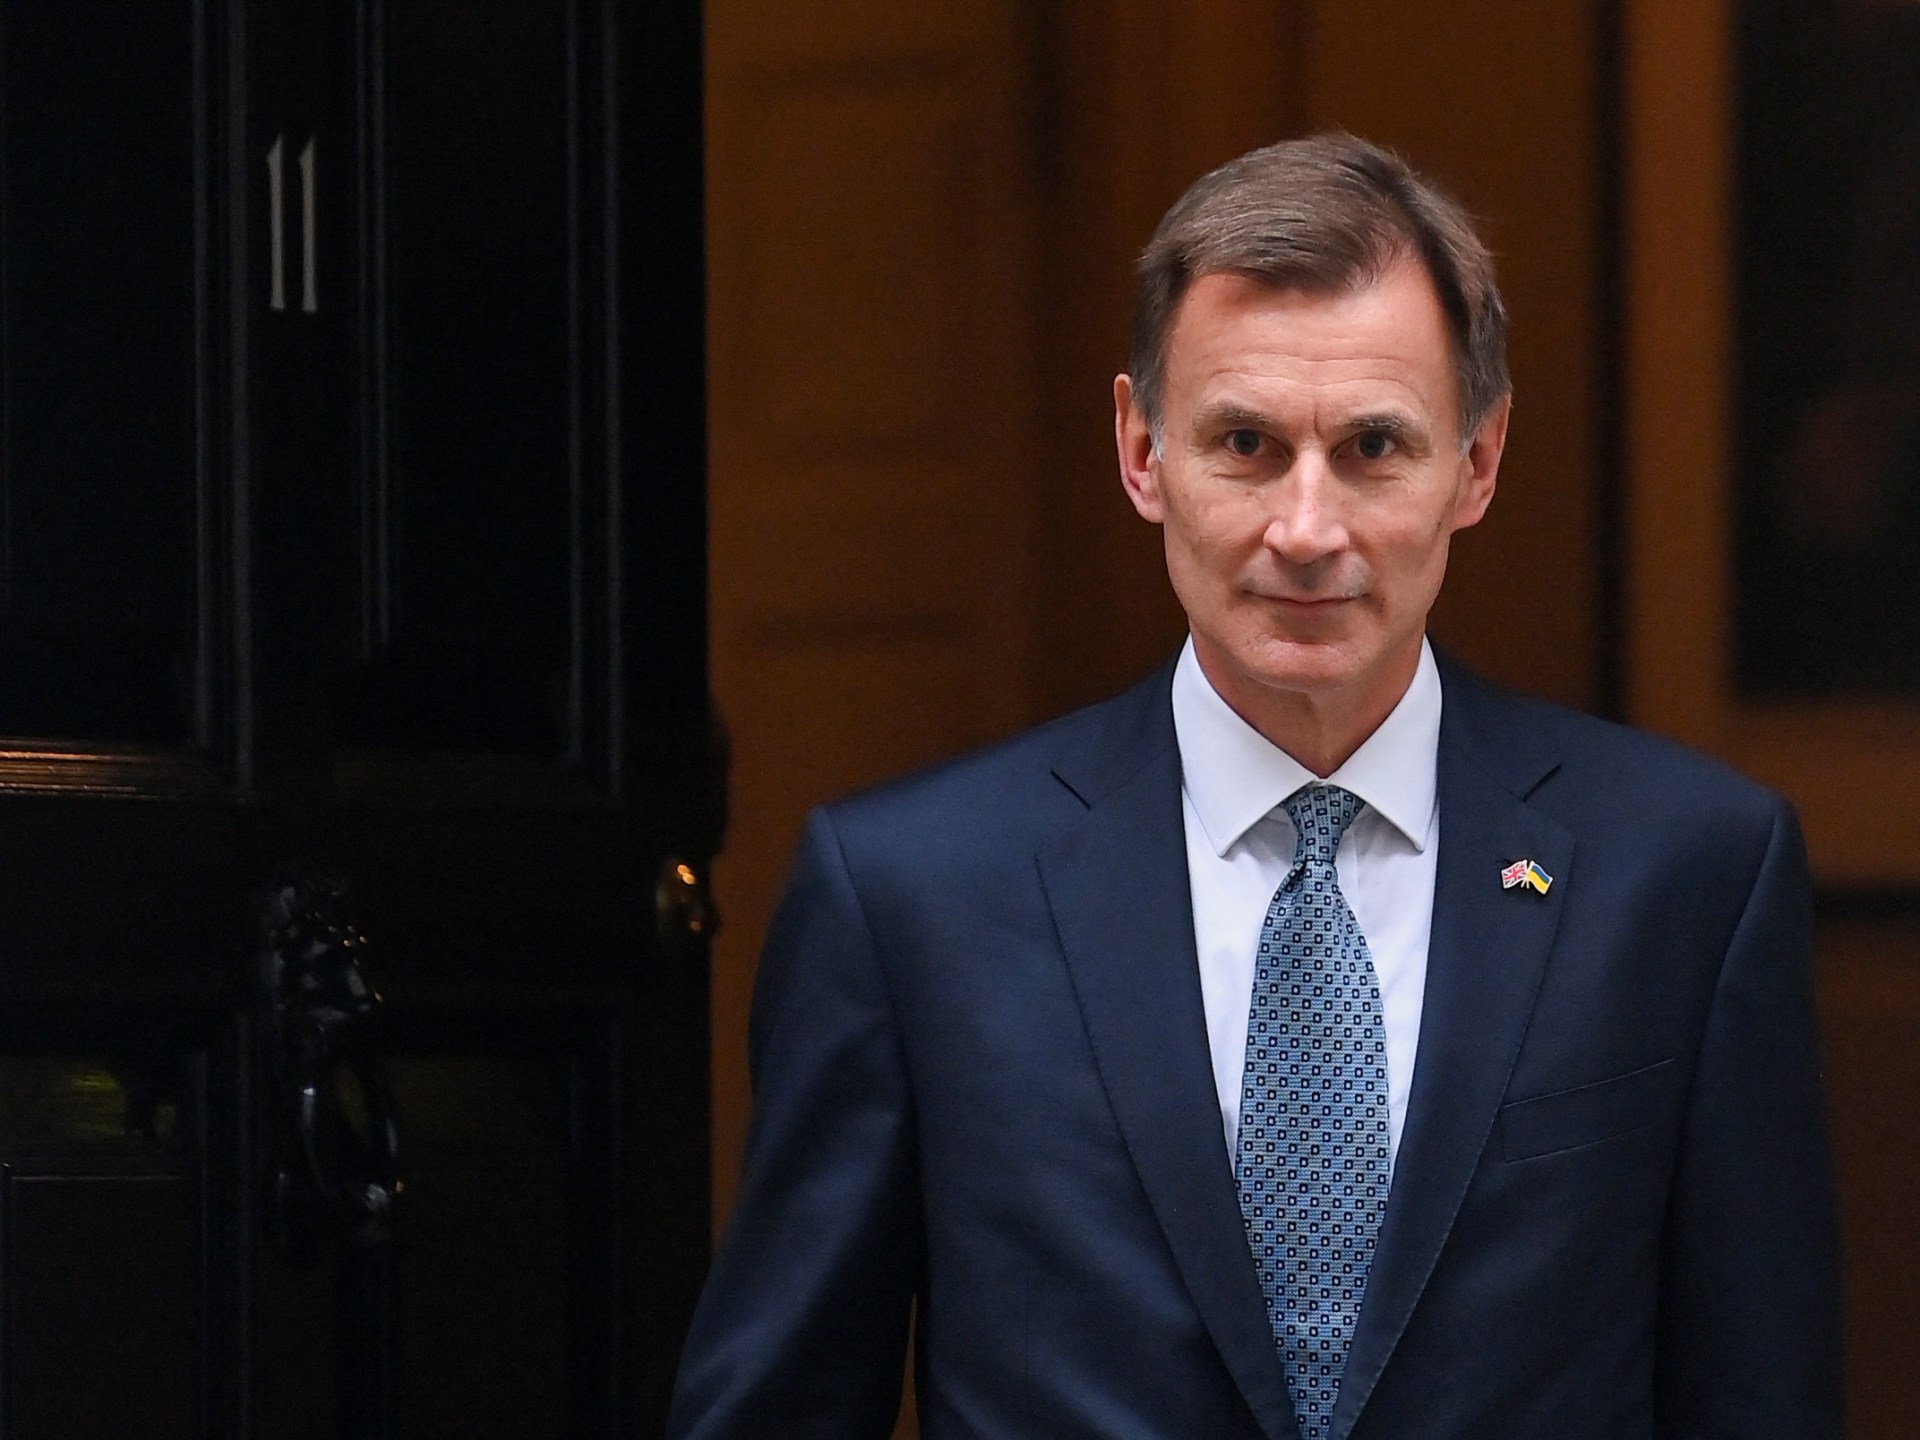 Hunt unveils new spending cuts, tax hikes to fix UK’s economy